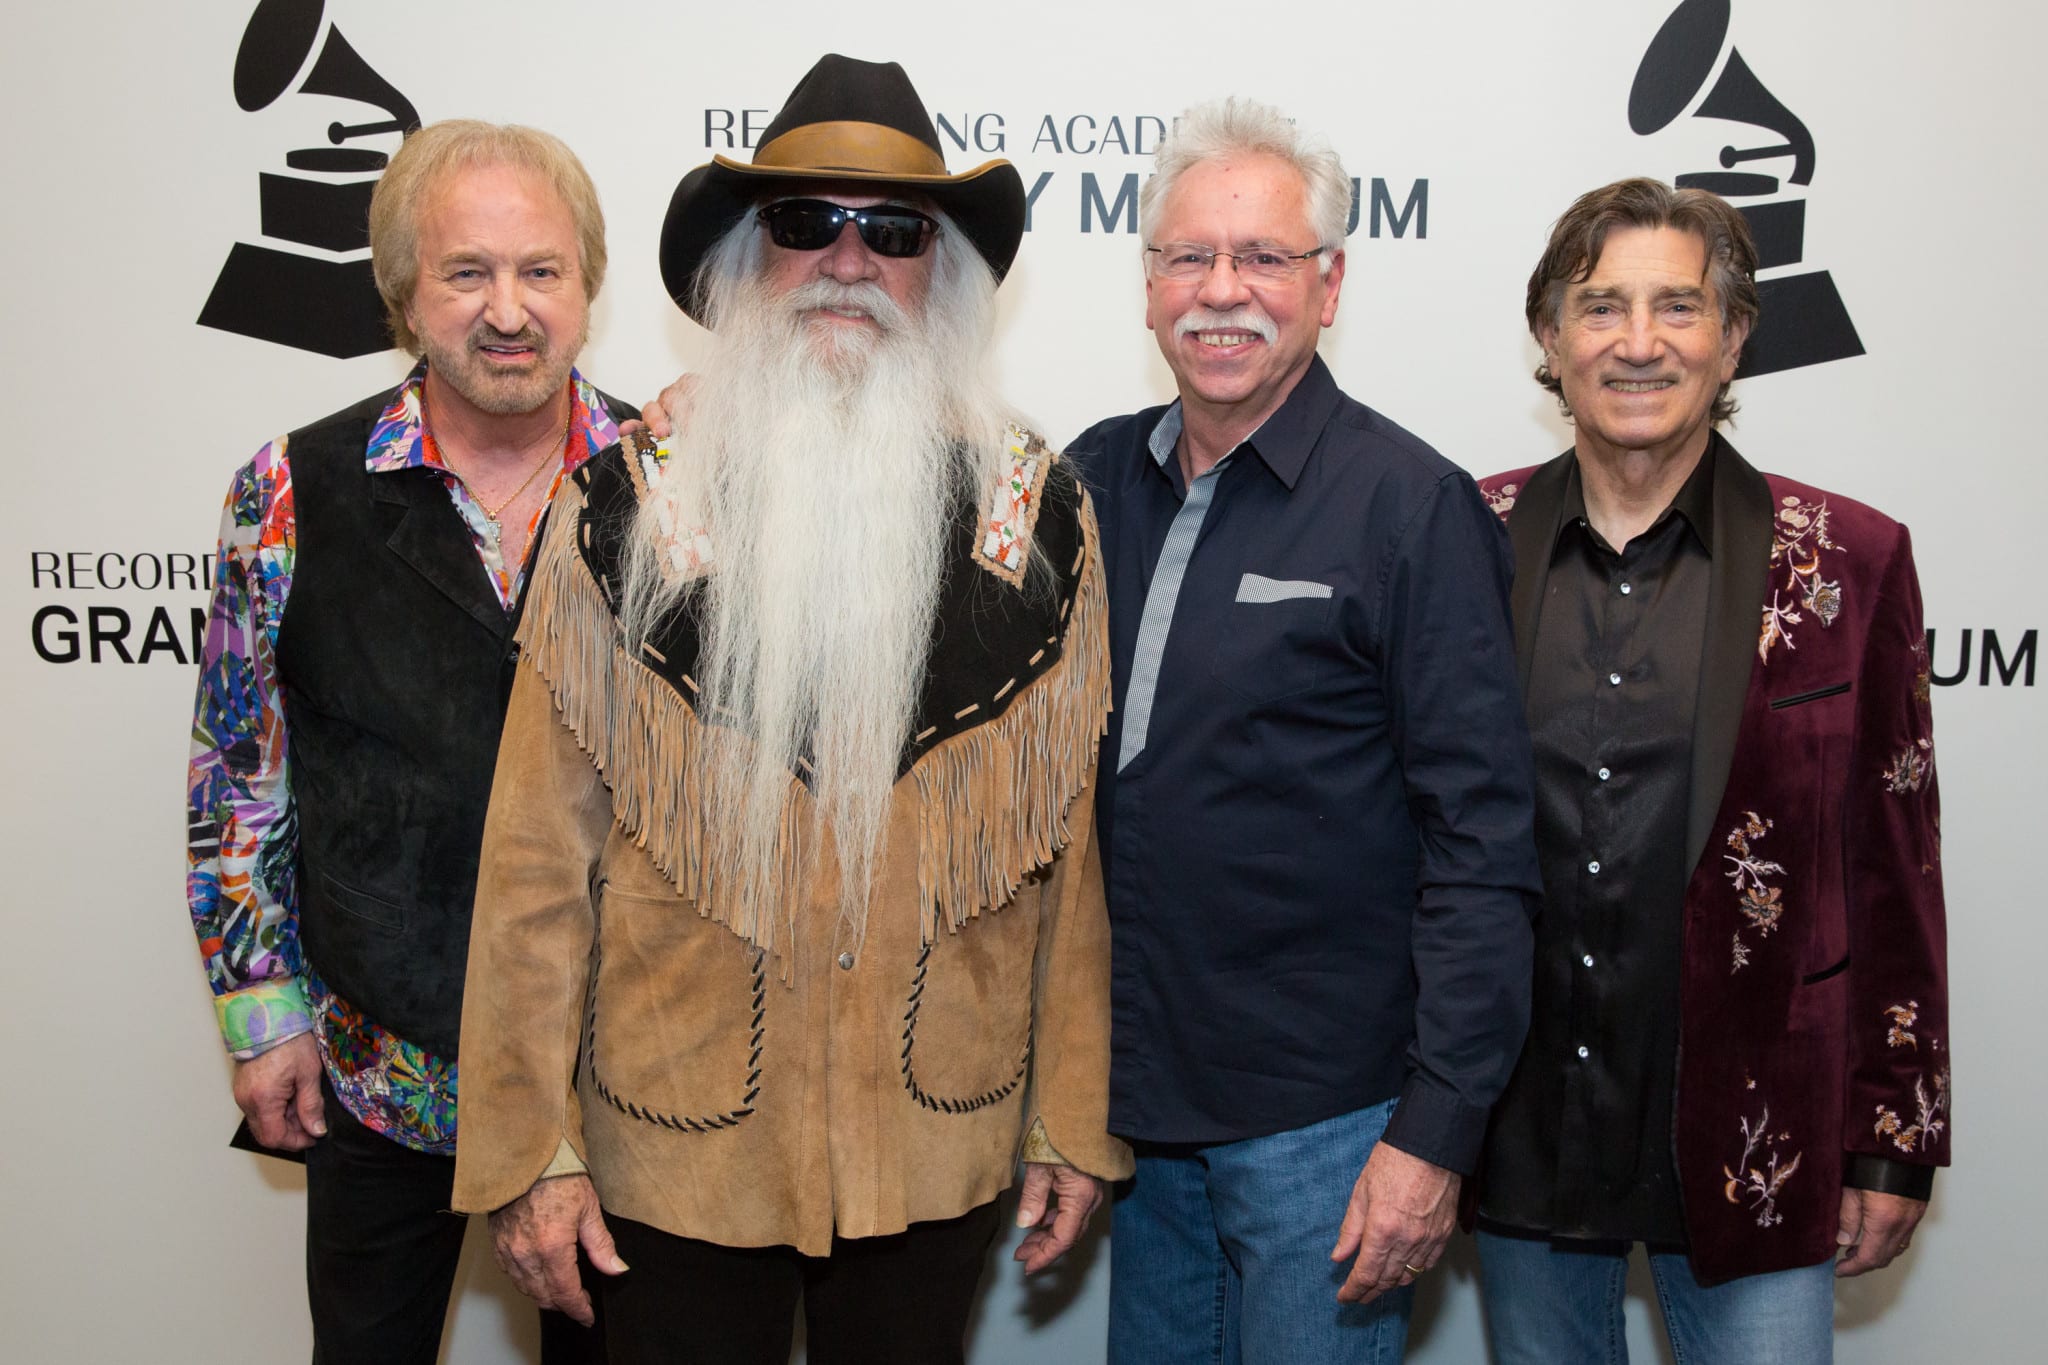 The Oak Ridge Boys were the latest group to join the Country Music Hall of Fame. They are not one of the forgotten country music groups